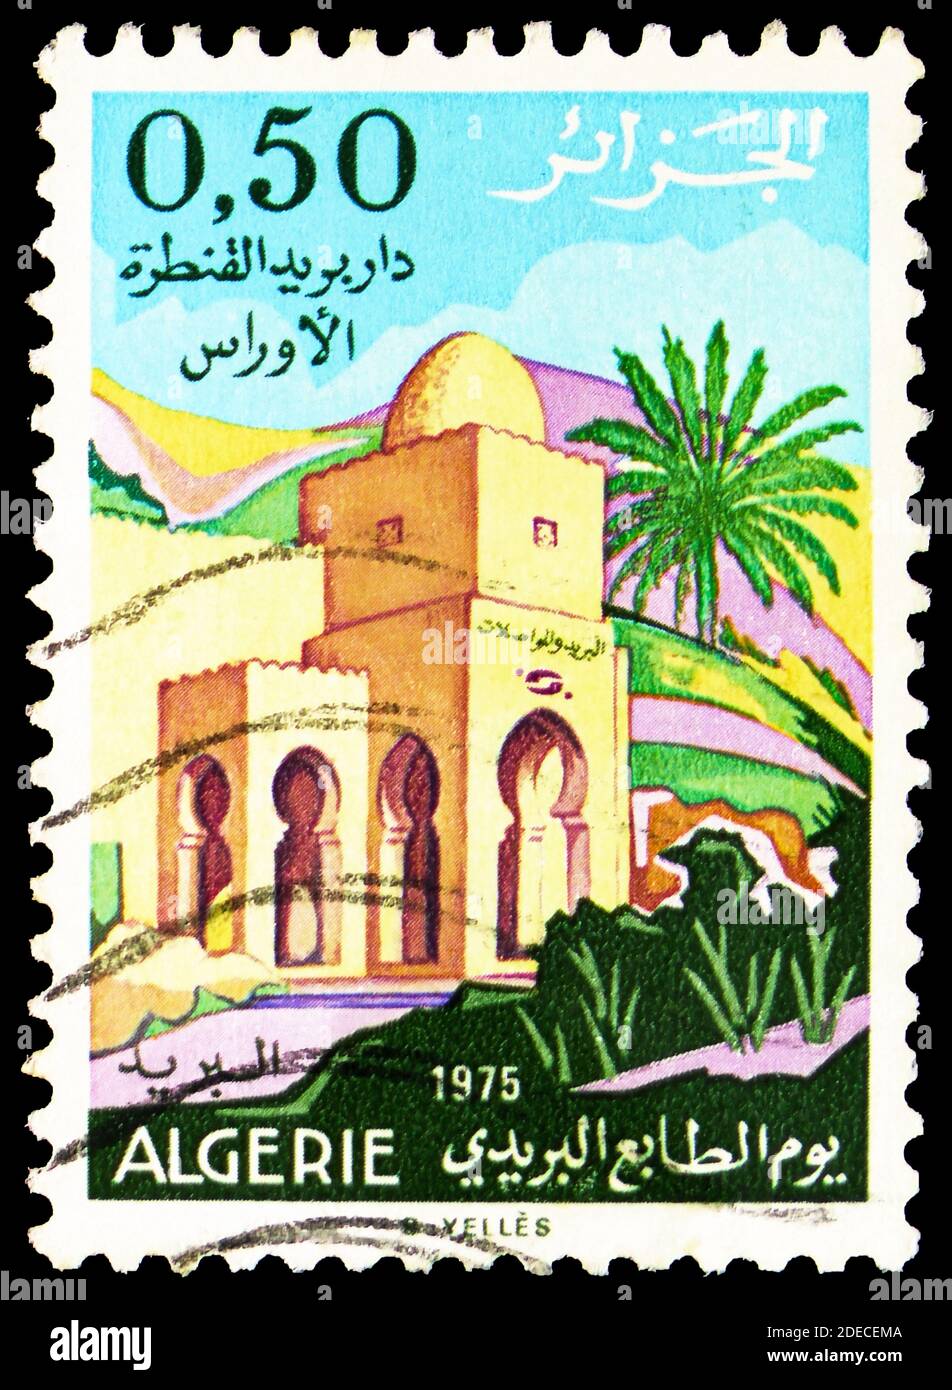 MOSCOW, RUSSIA - OCTOBER 17, 2020: Postage stamp printed in Algeria shows Al Kantara, Stamp Day, circa 1975 Stock Photo